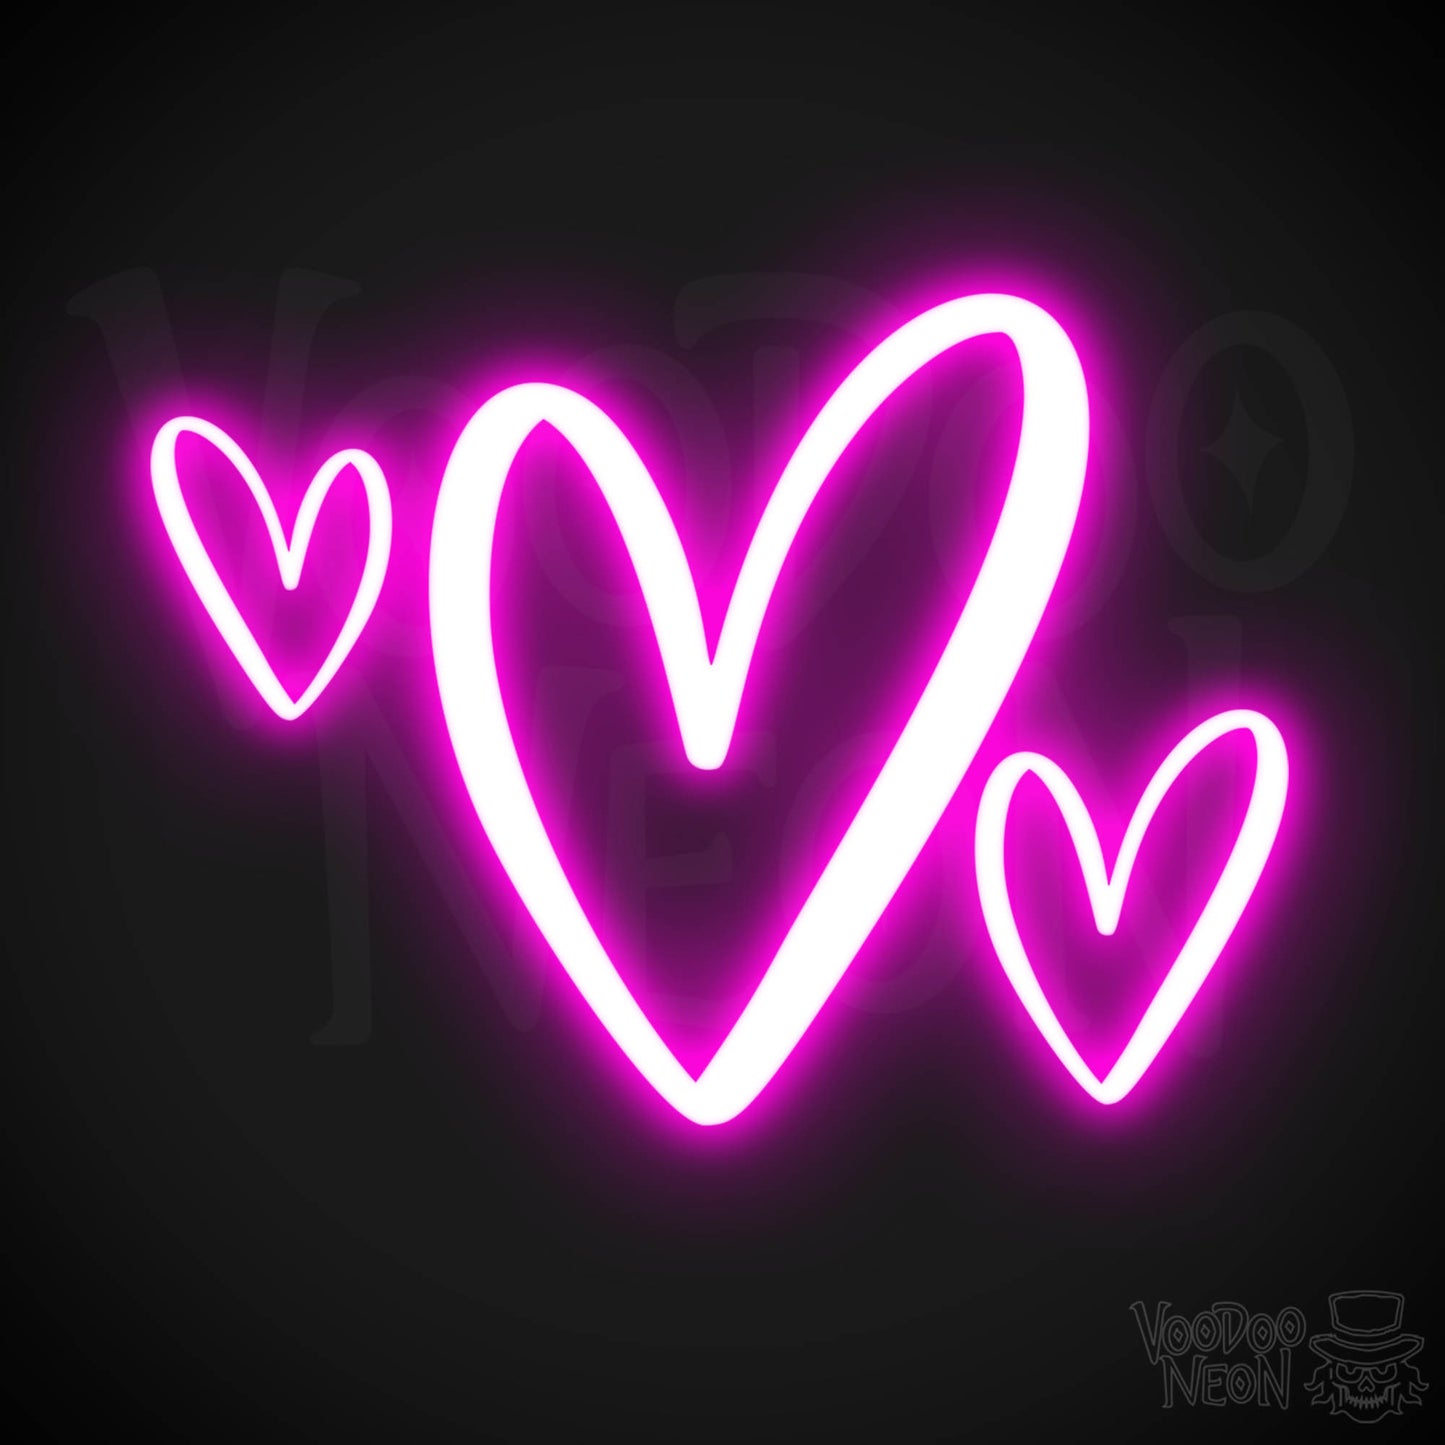 Neon Love Heart - Love Heart Neon Sign - LED Wall Art - Color Pink